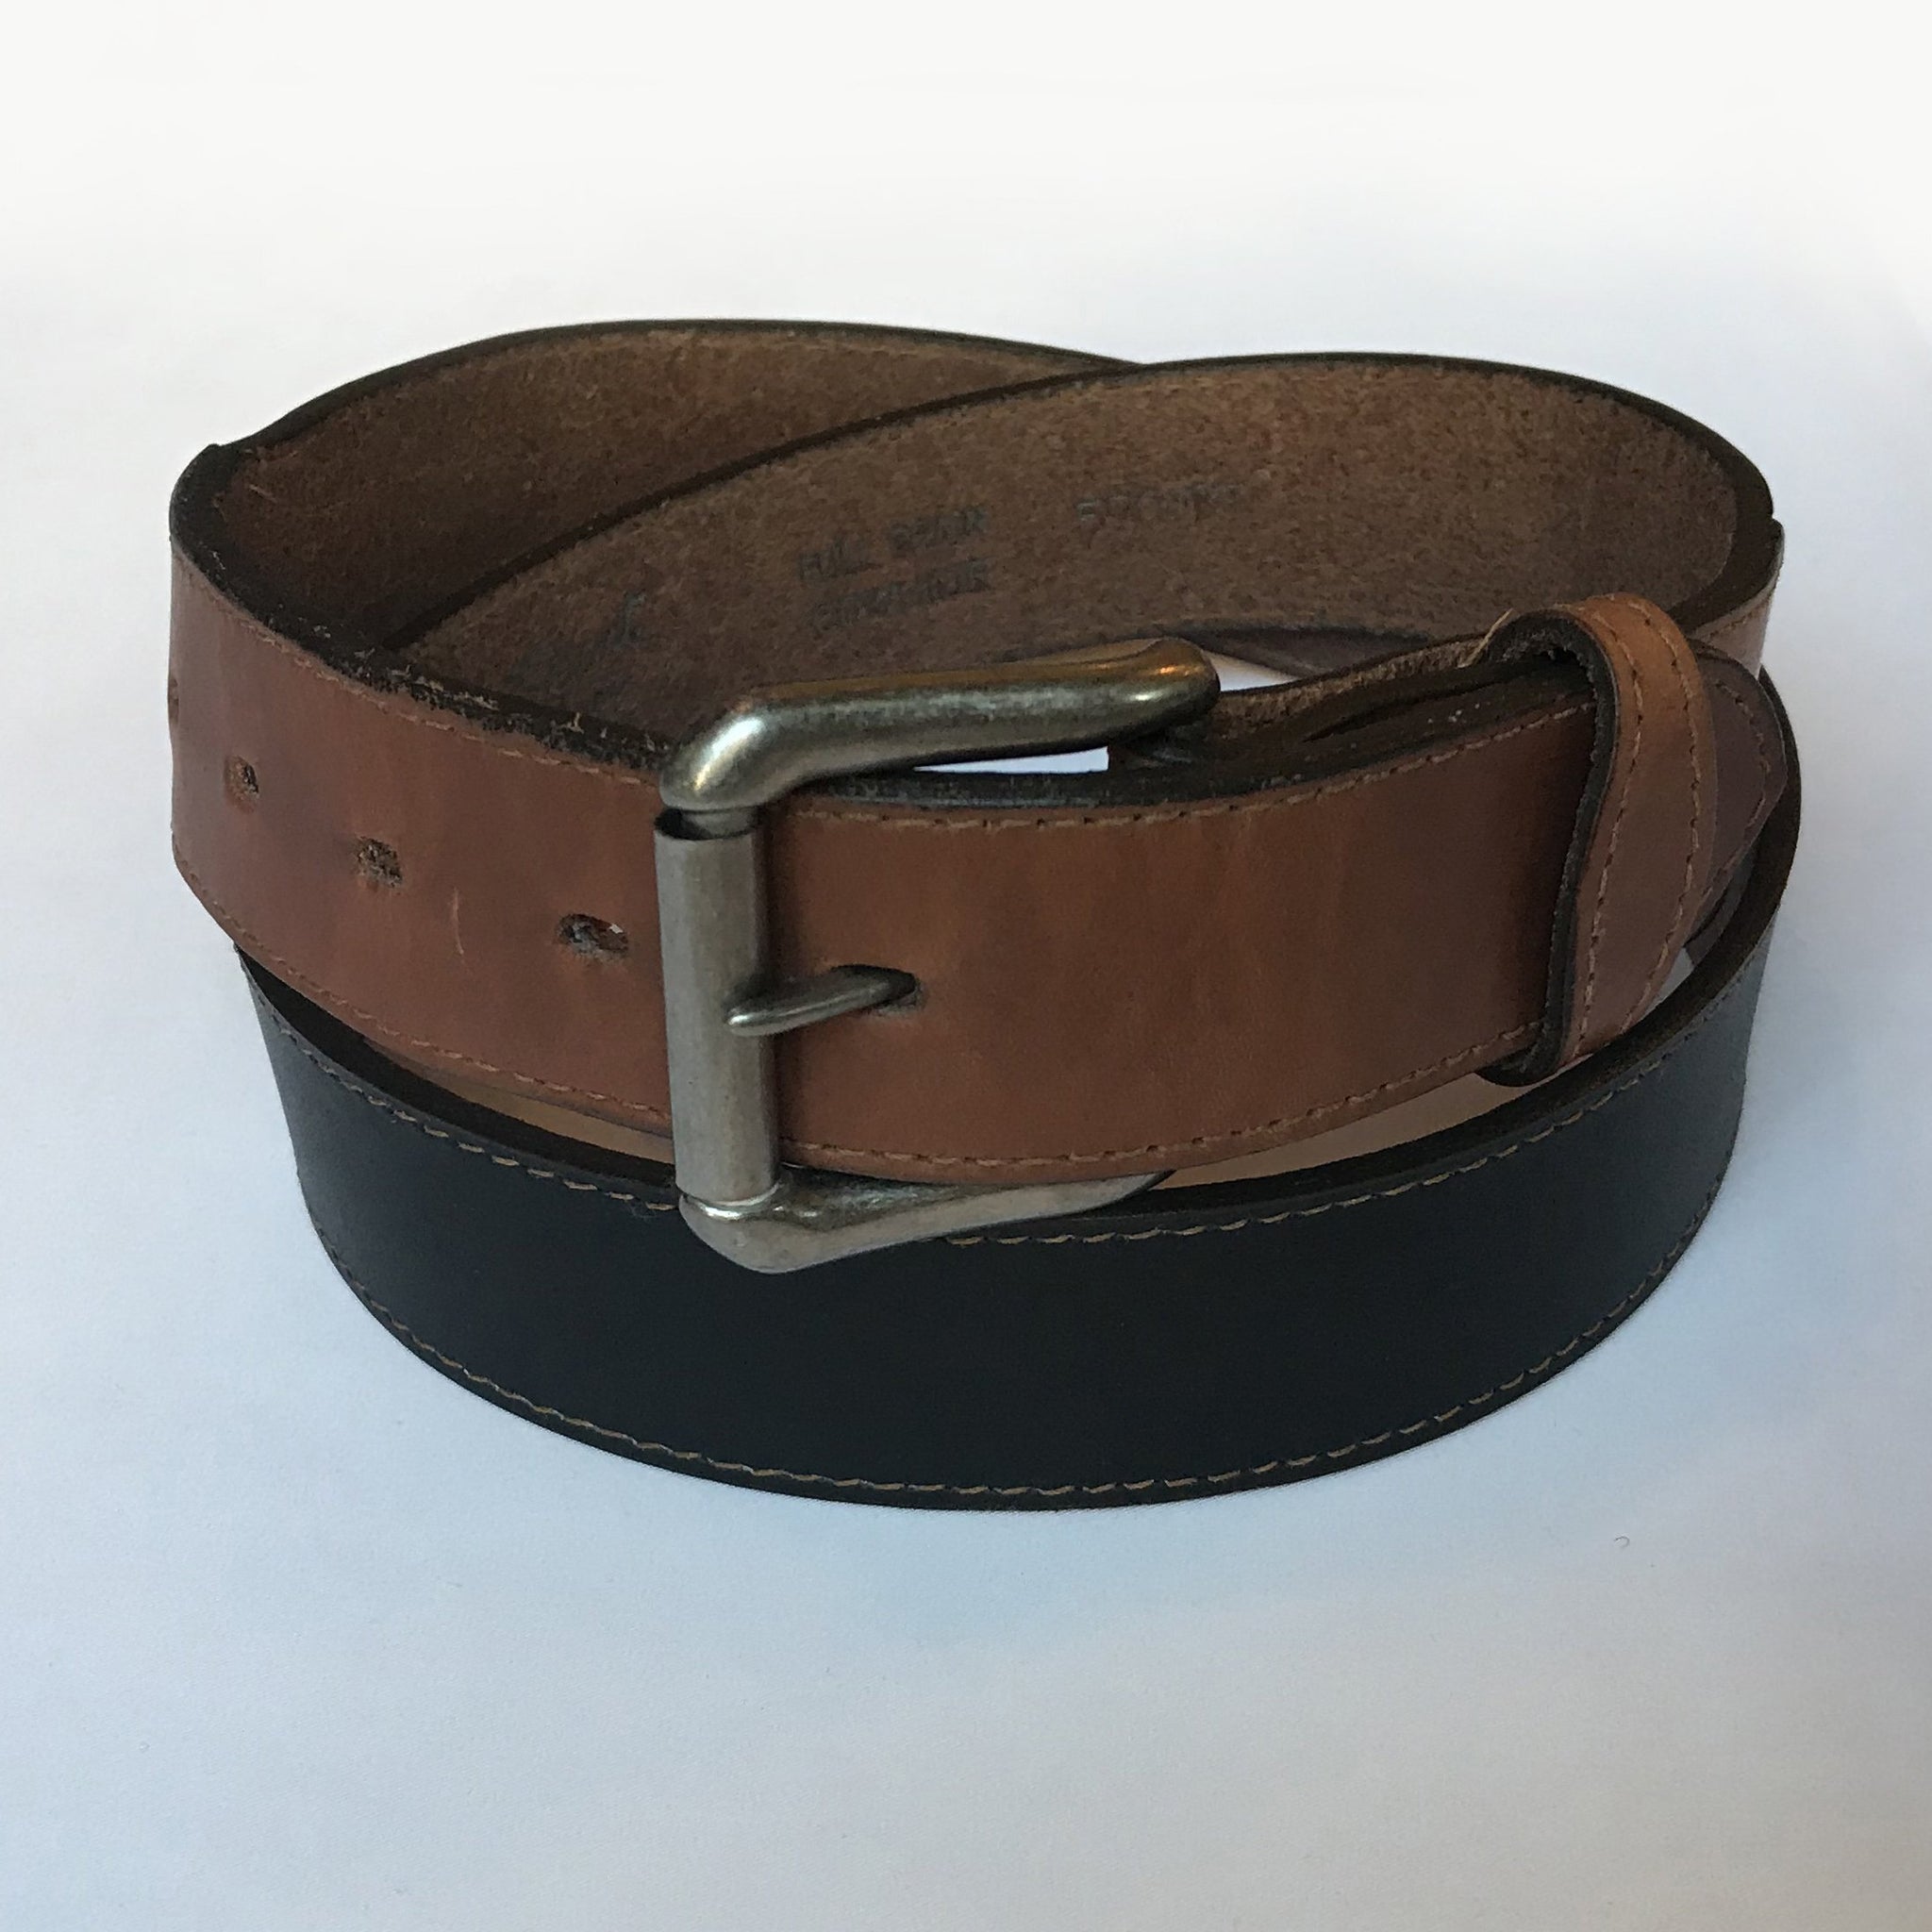 Rockmount Ranch Wear Accessory: Black and Tan Leather Belt - OutWest Shop